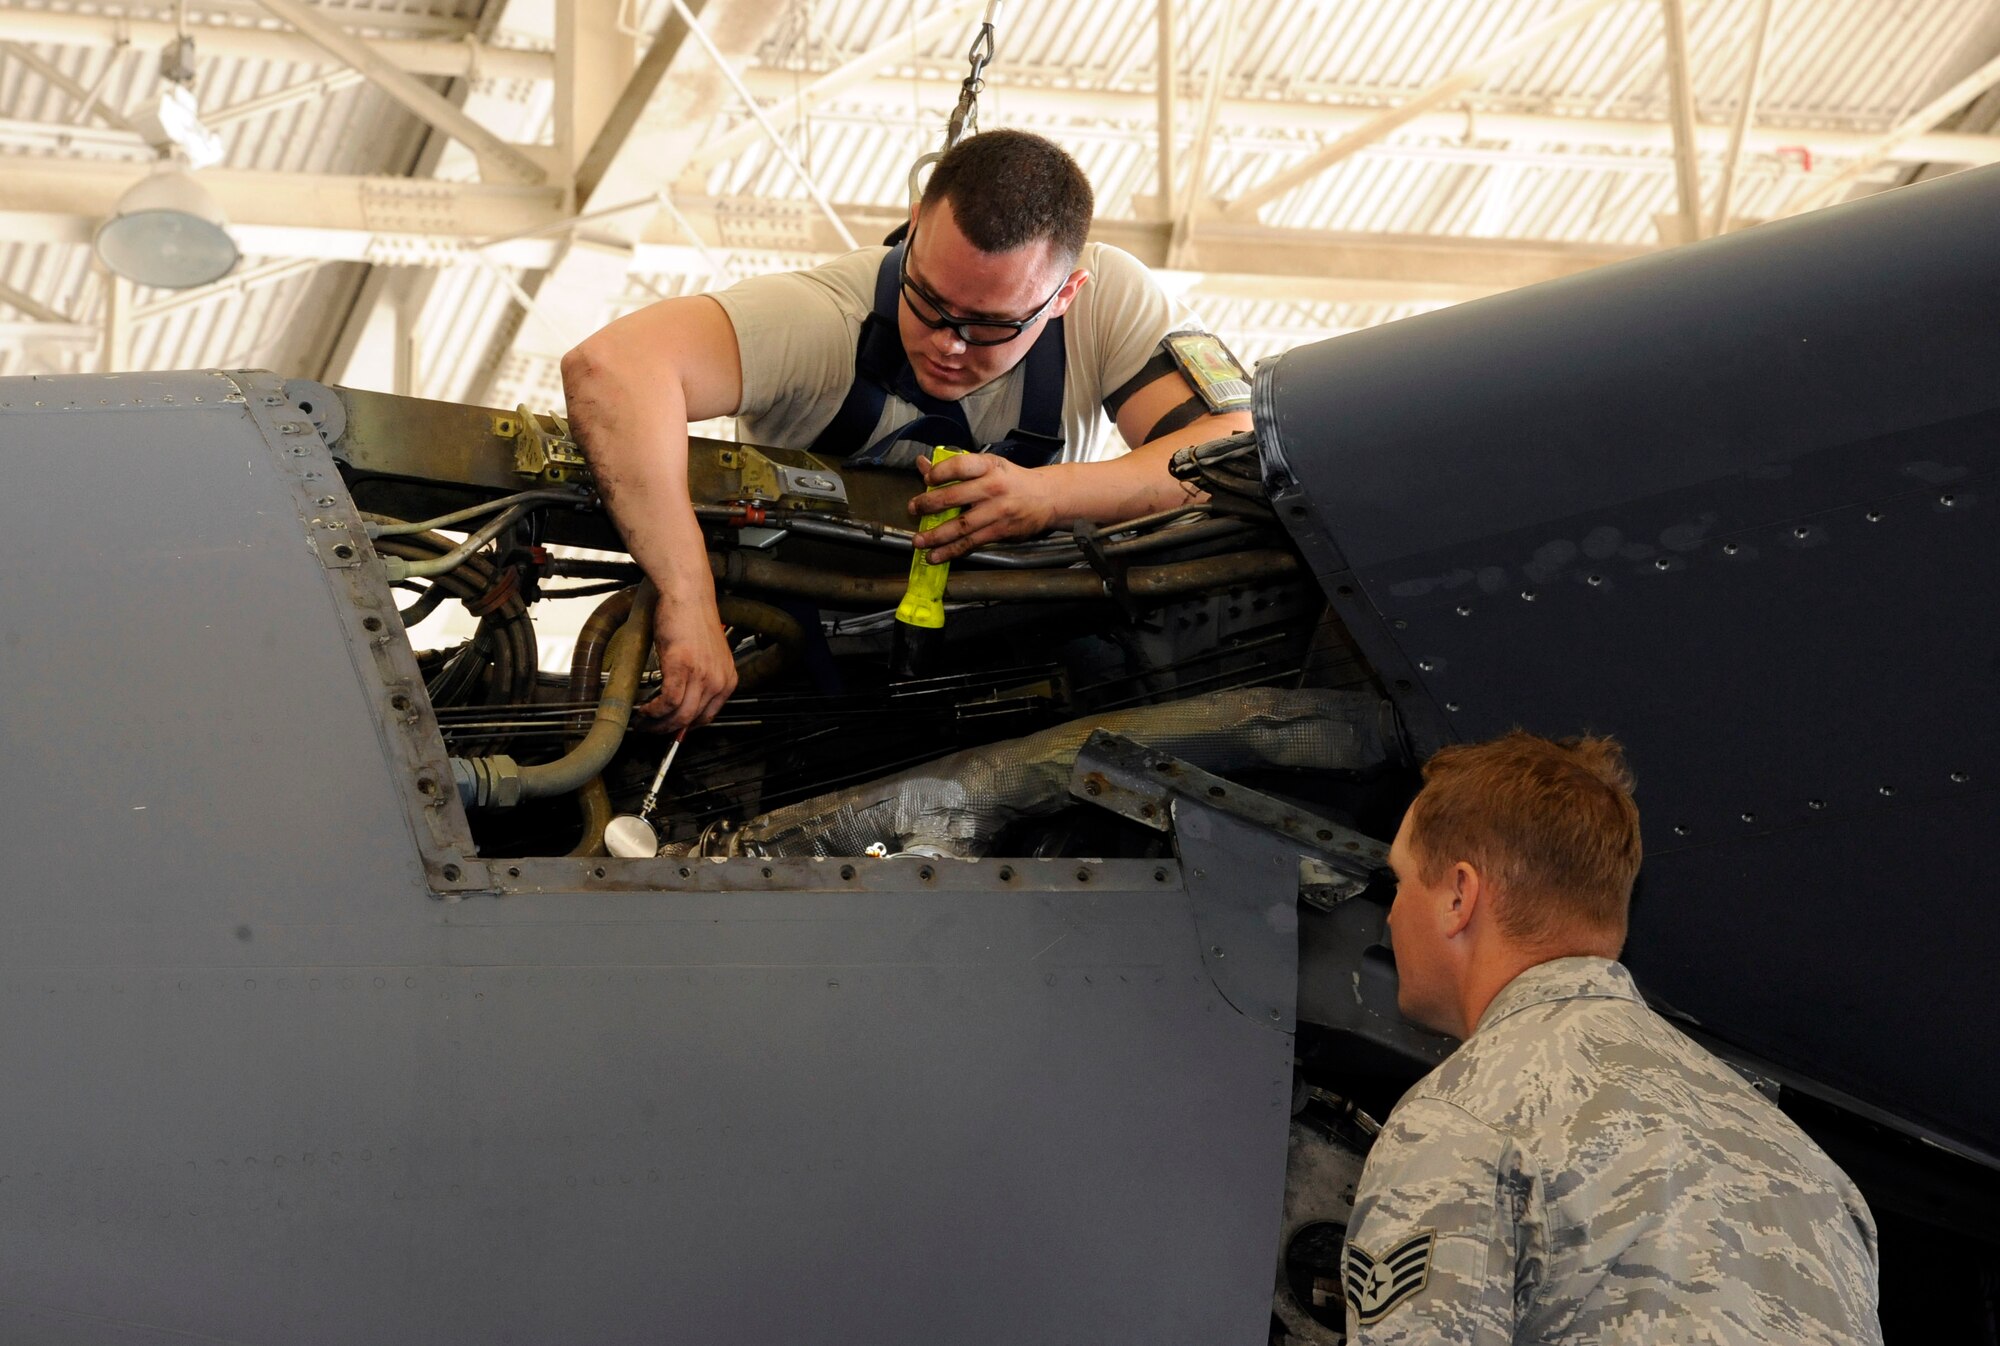 Senior Airman Greg Pagallo, 2nd Maintenance Squadron, inspects the throttle cables on the number two pod kneecap of a B-52H Stratofortress as Staff Sgt. Matt Lachney, 2 MXS, observes inside the Phase Hangar on Barksdale Air Force Base, La., May 1. These cables provide power to the landing gear and to the structures that flex the wings upward during flight. (U.S. Air Force photo/Airman 1st Class Andrew Moua)(RELEASED)